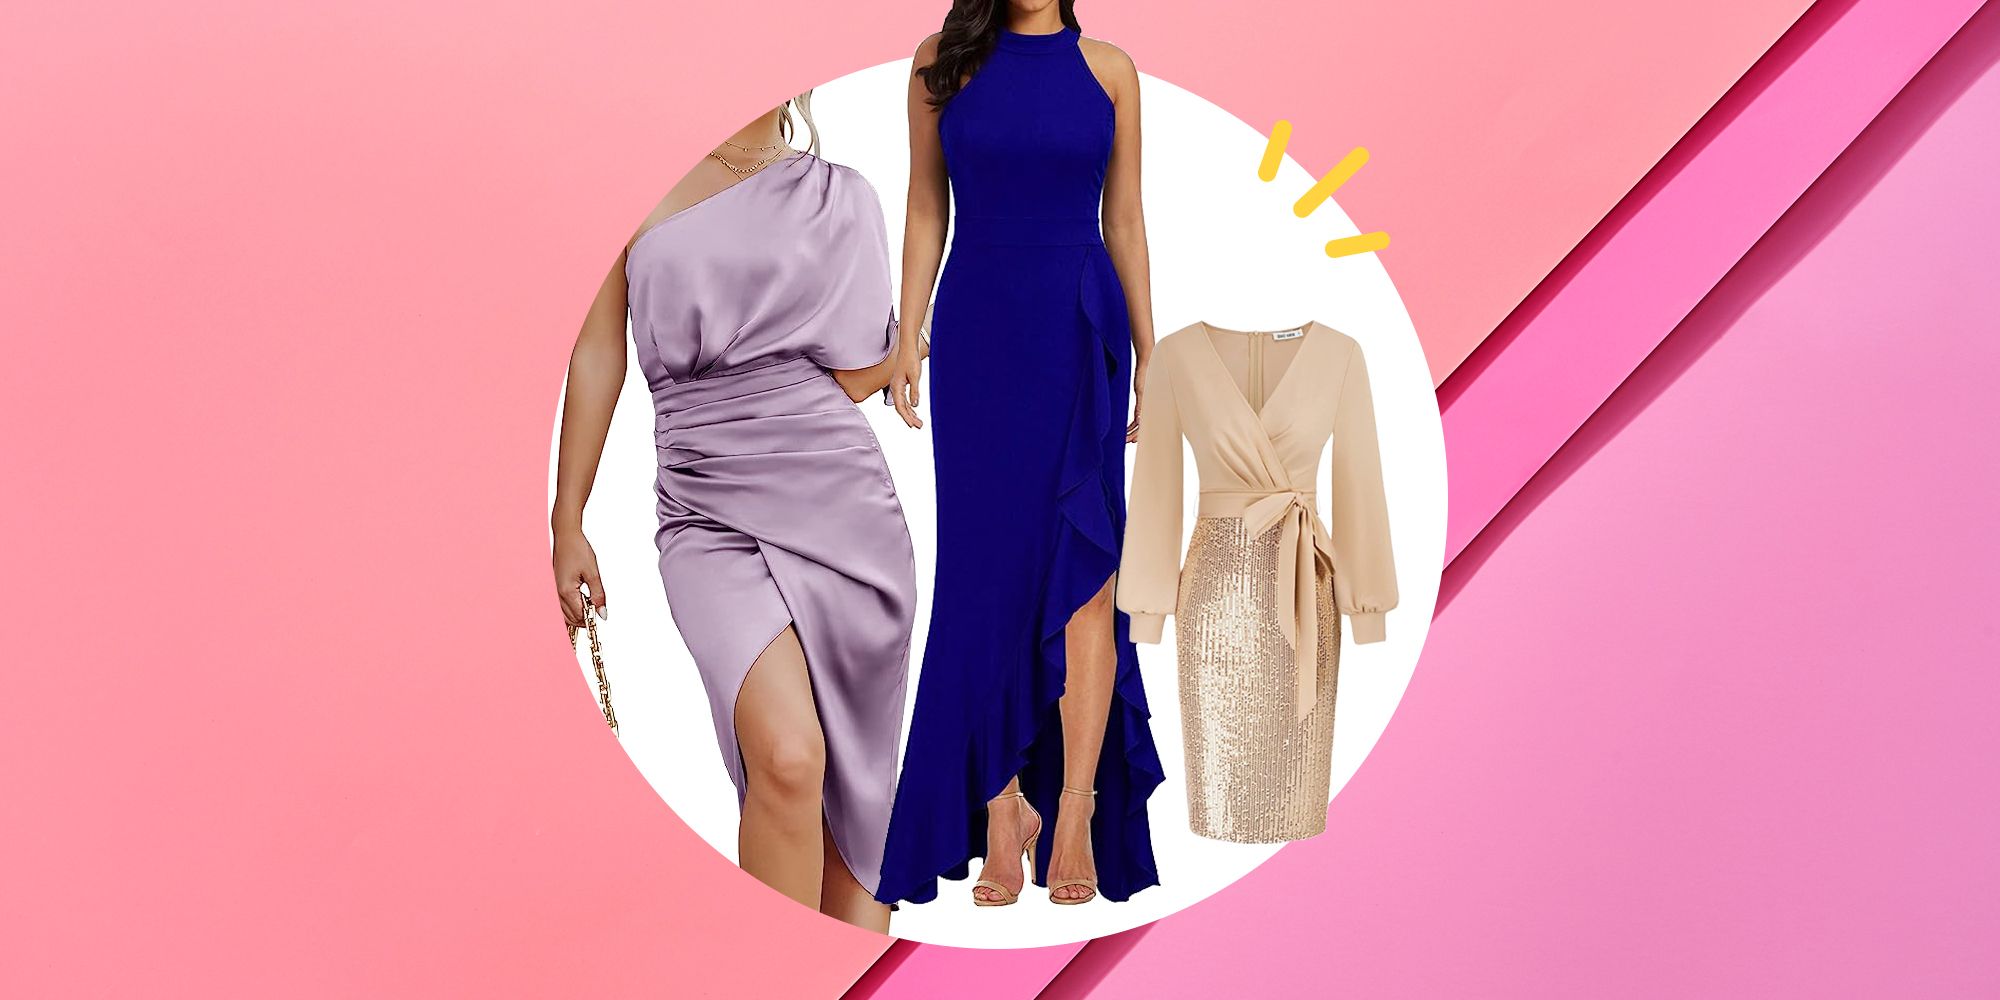 Amazon.com - The Place Where The Best Deals Are Found! ** Wedding Jumpsuit  | Dresses to wear to a wedding, Summer wedding outfits, Wedding outfit